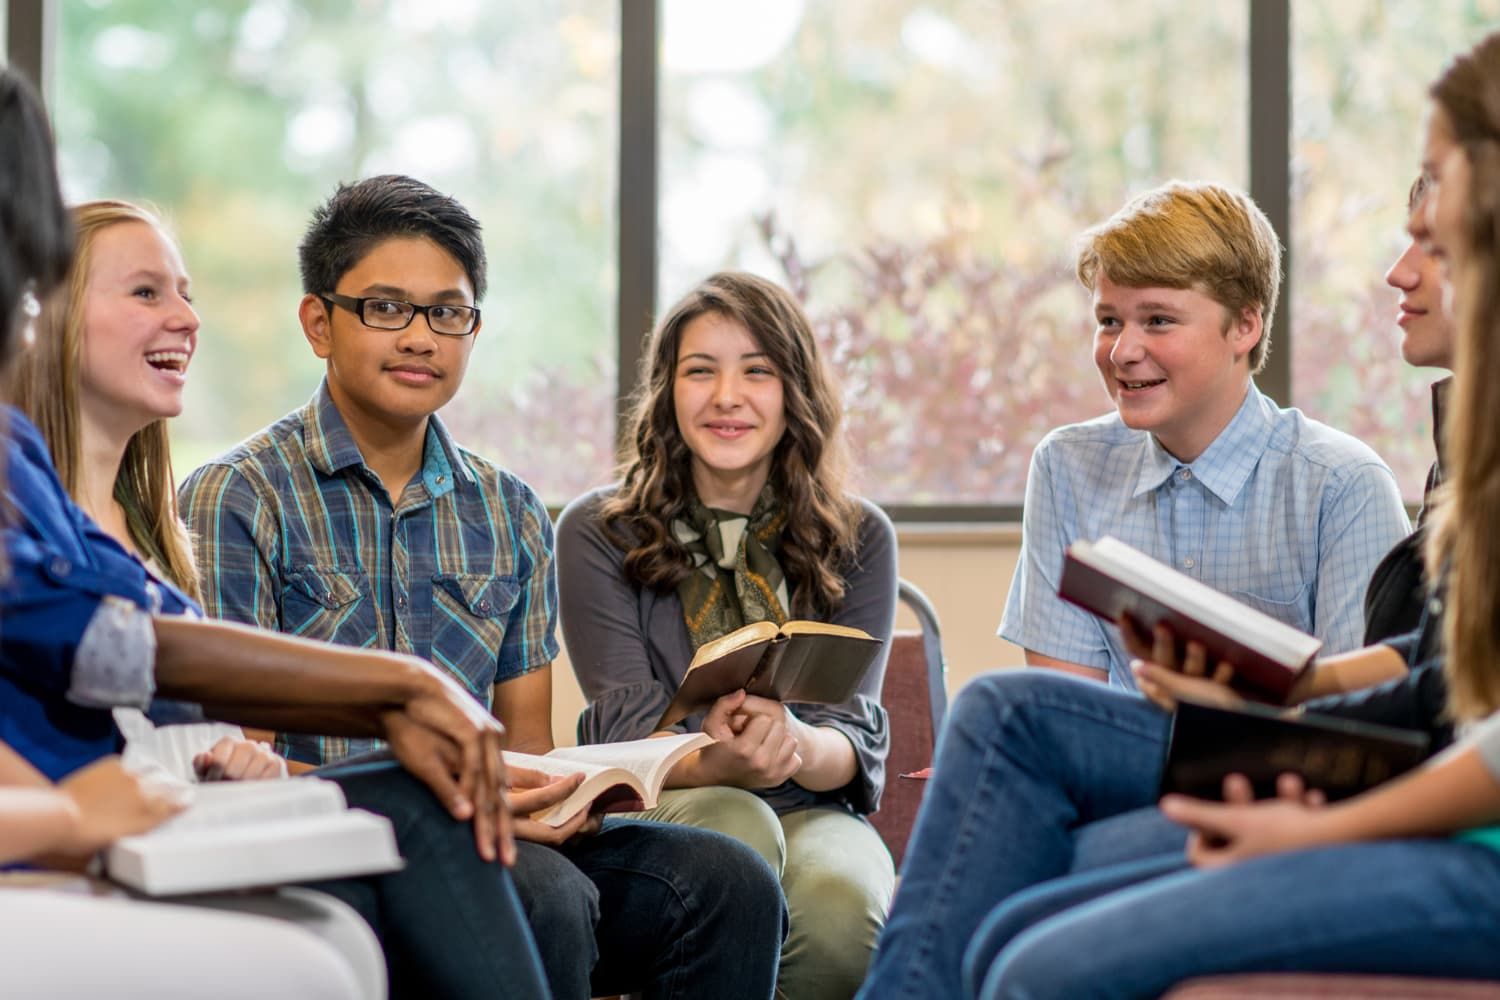 A group of teenagers studying the Bible together